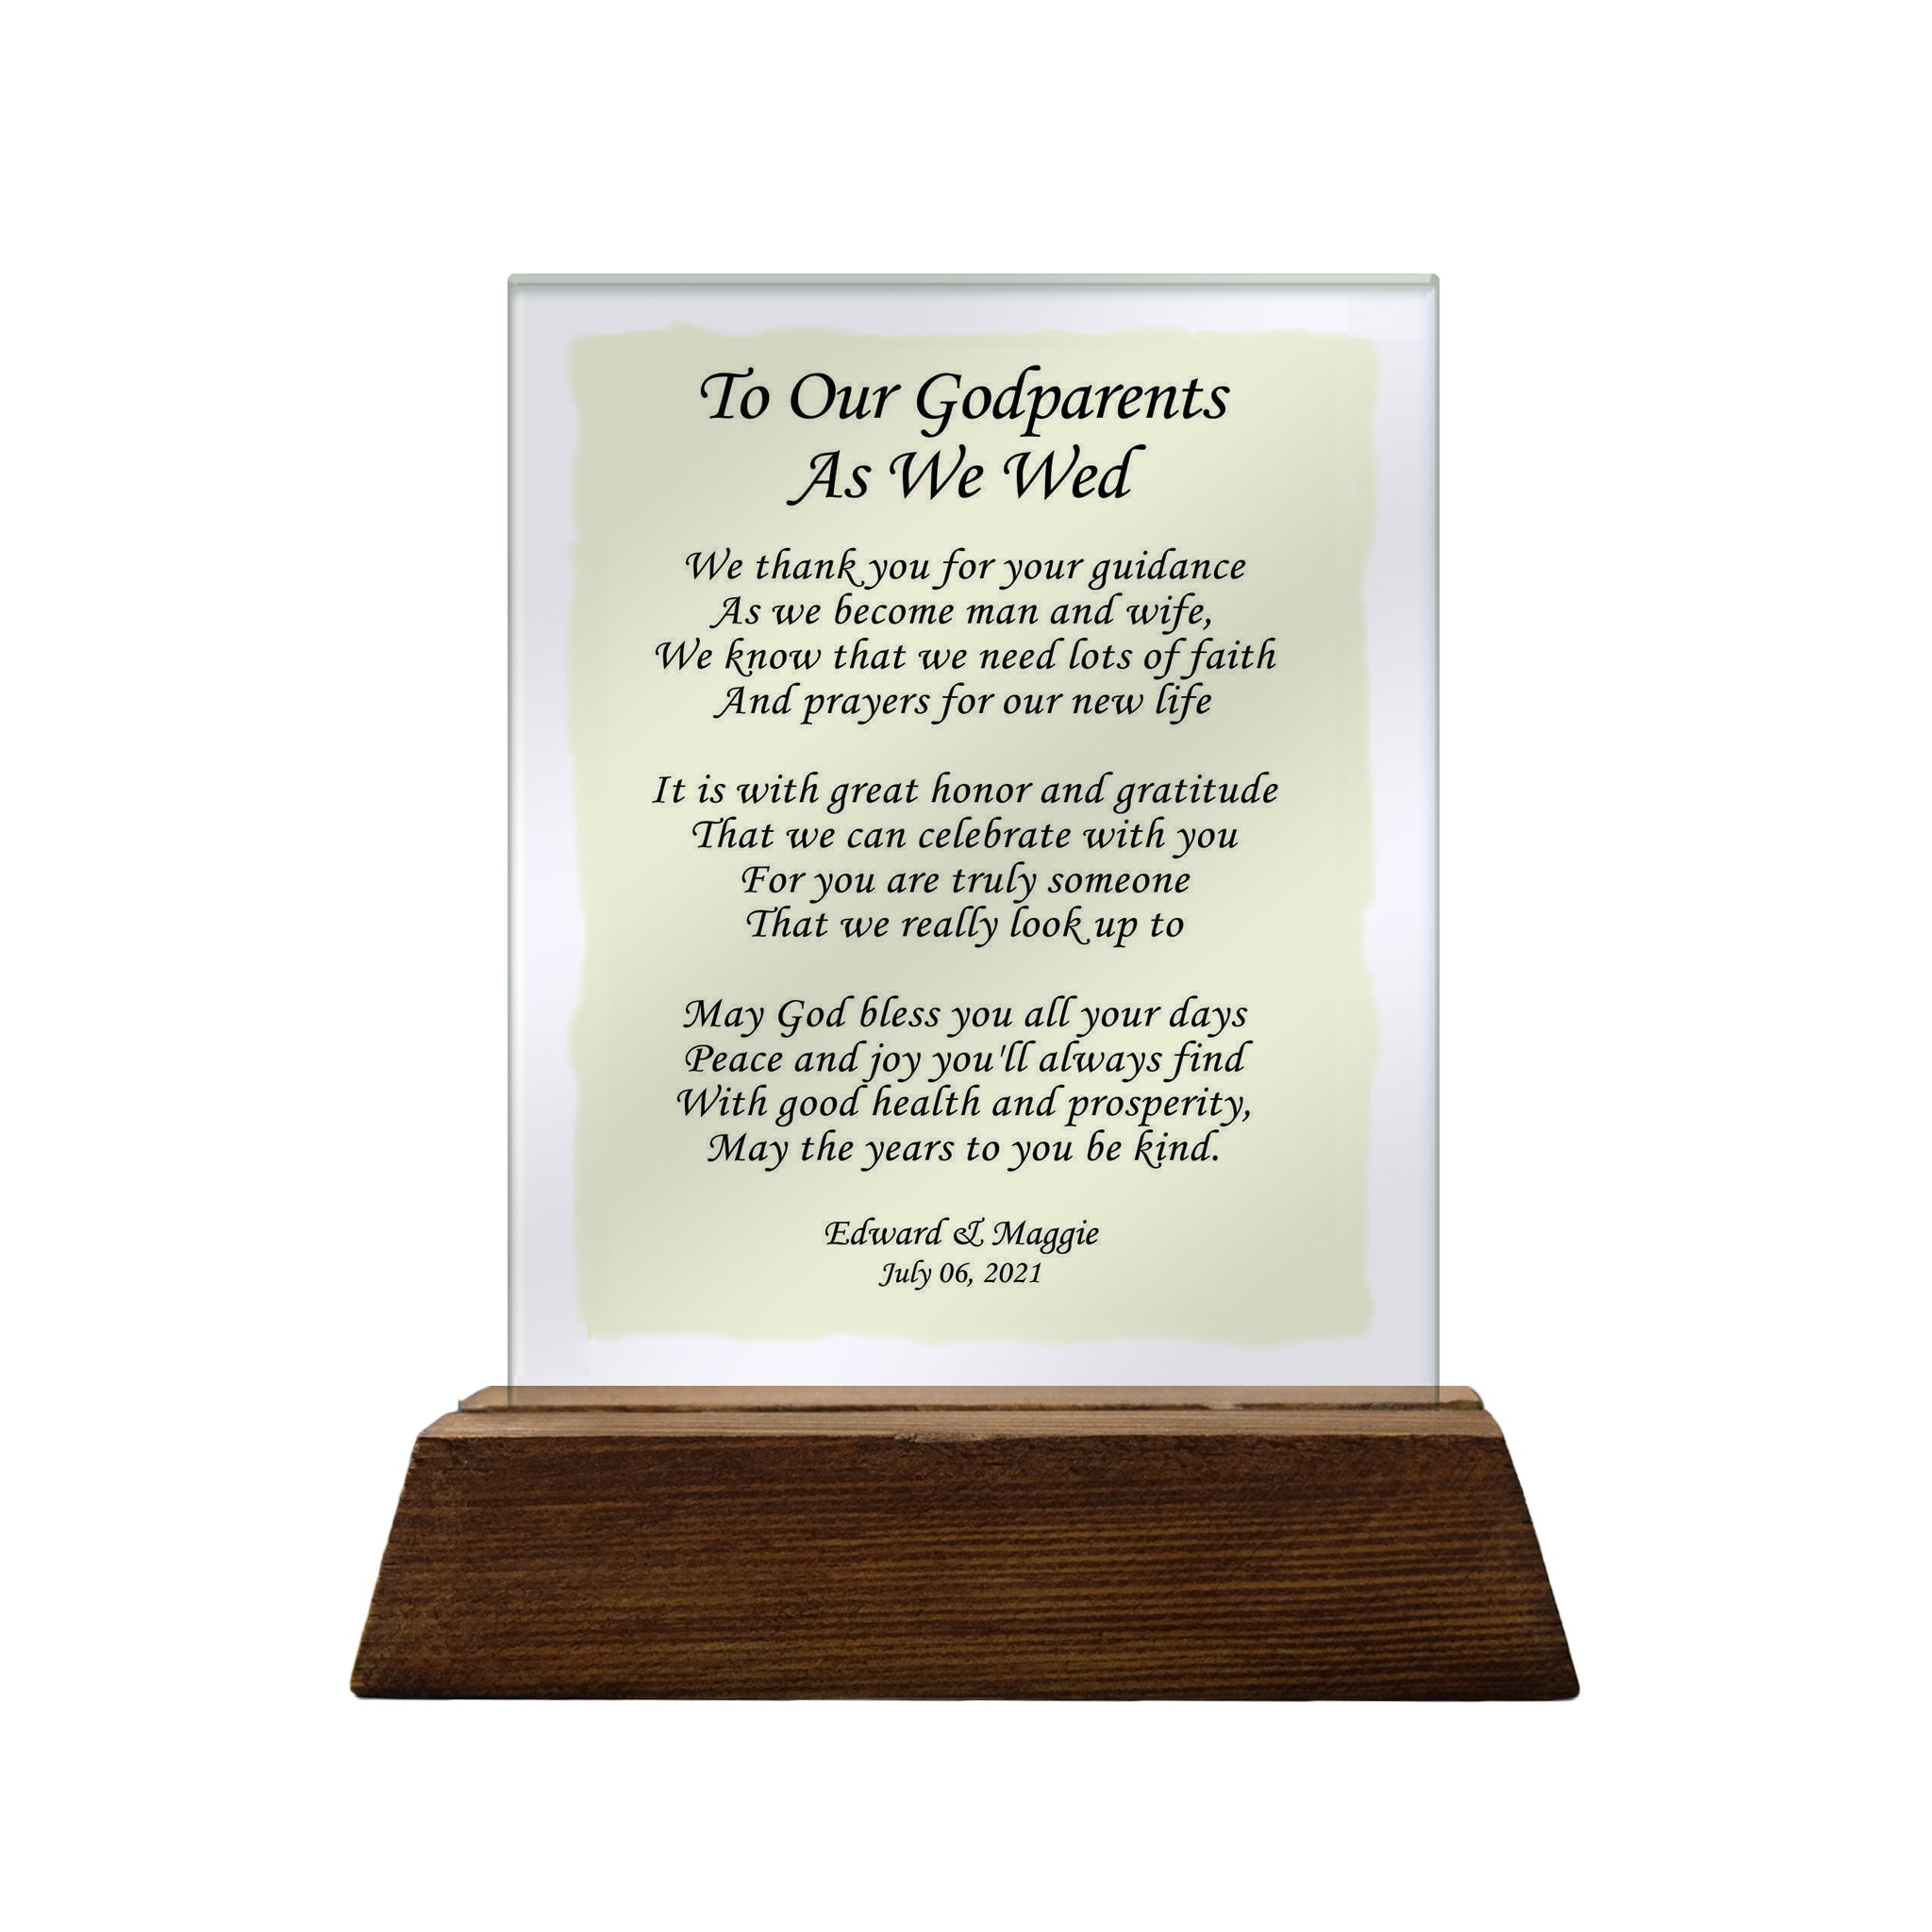 To Our Godparents As We Wed Personalized Glass Plaque